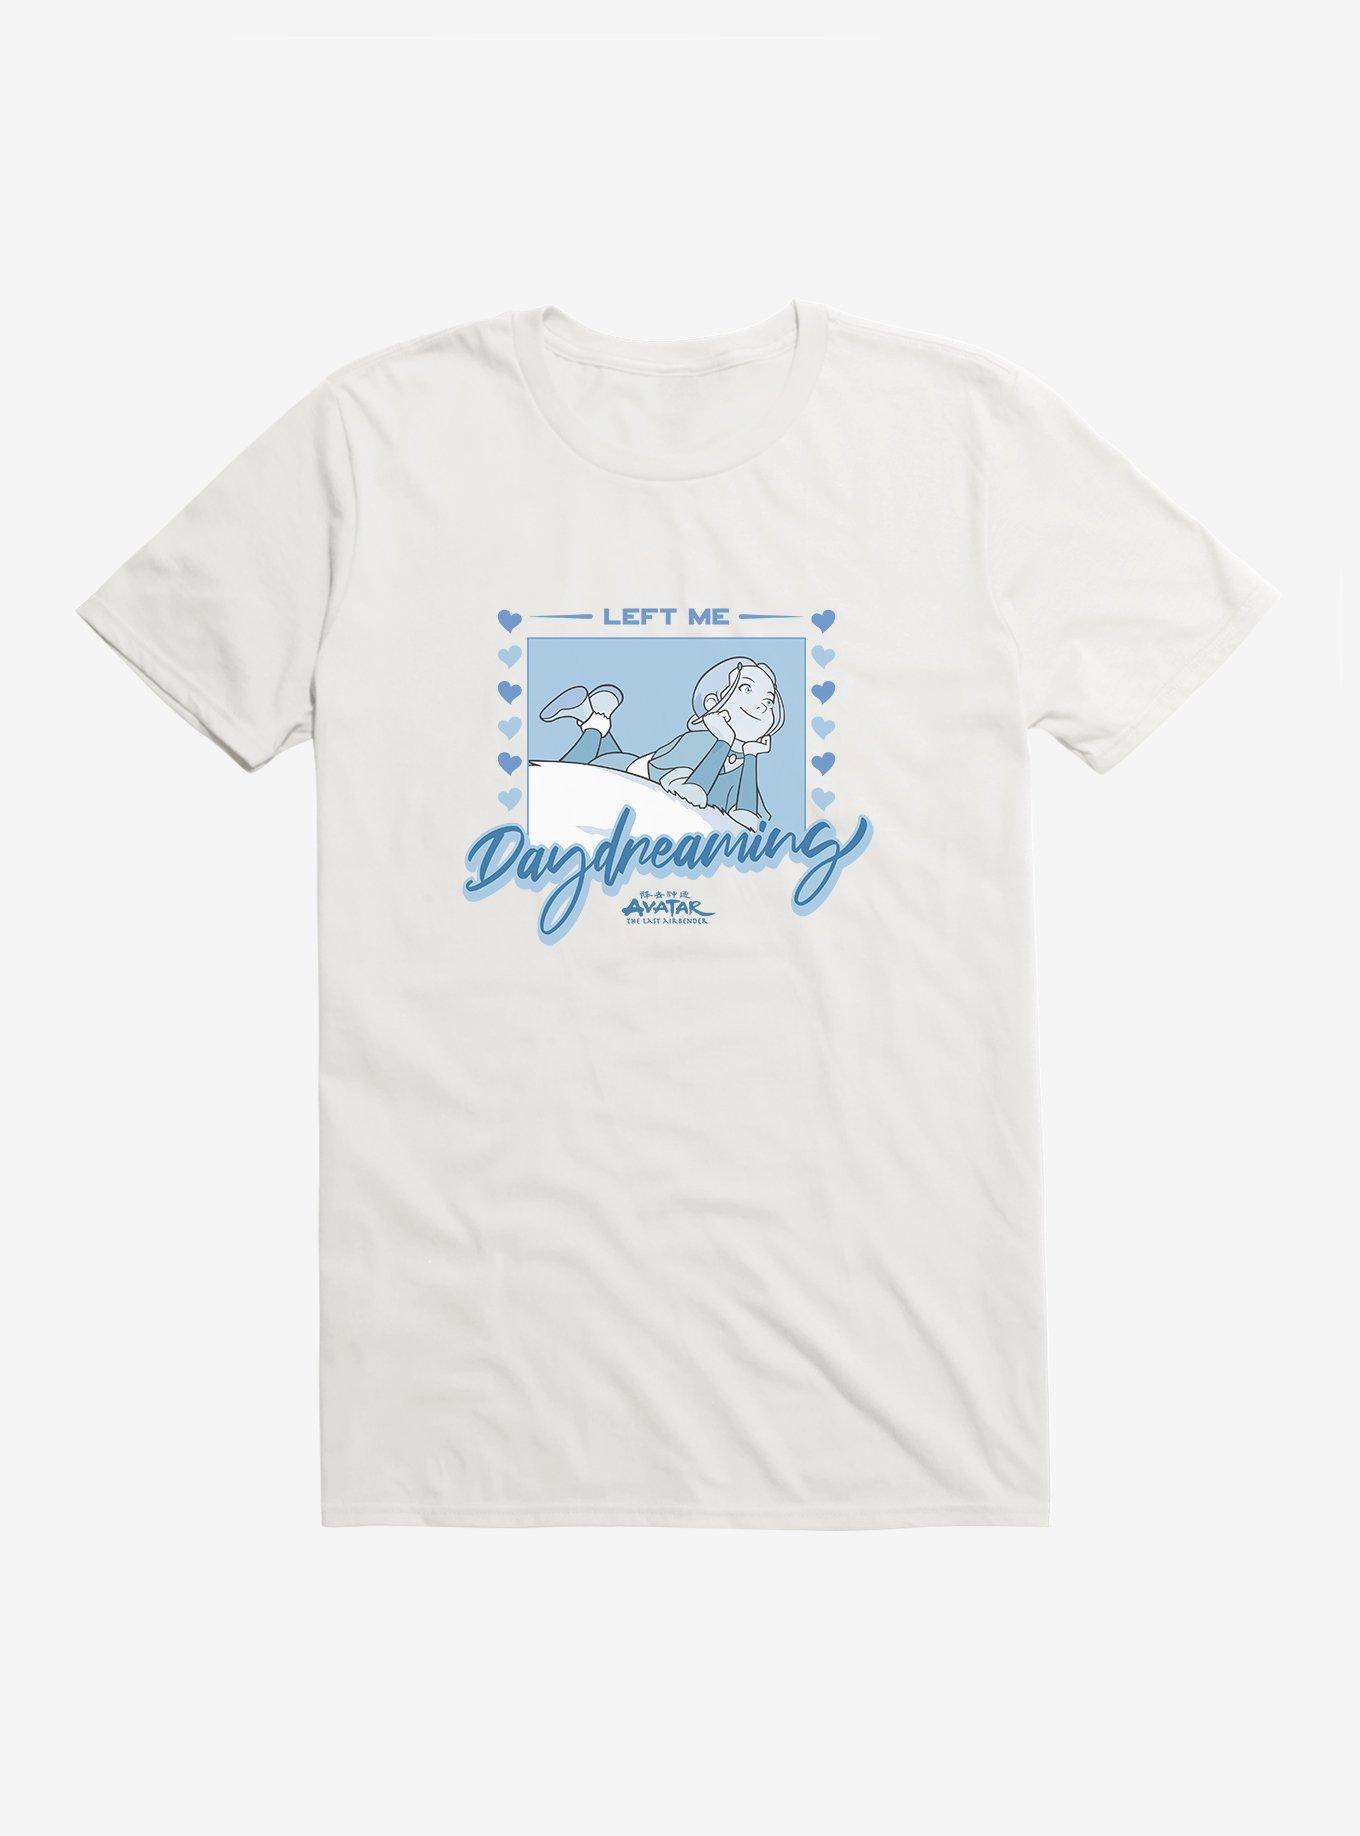 Avatar: The Last Airbender Day Dreaming T-Shirt, WHITE, hi-res